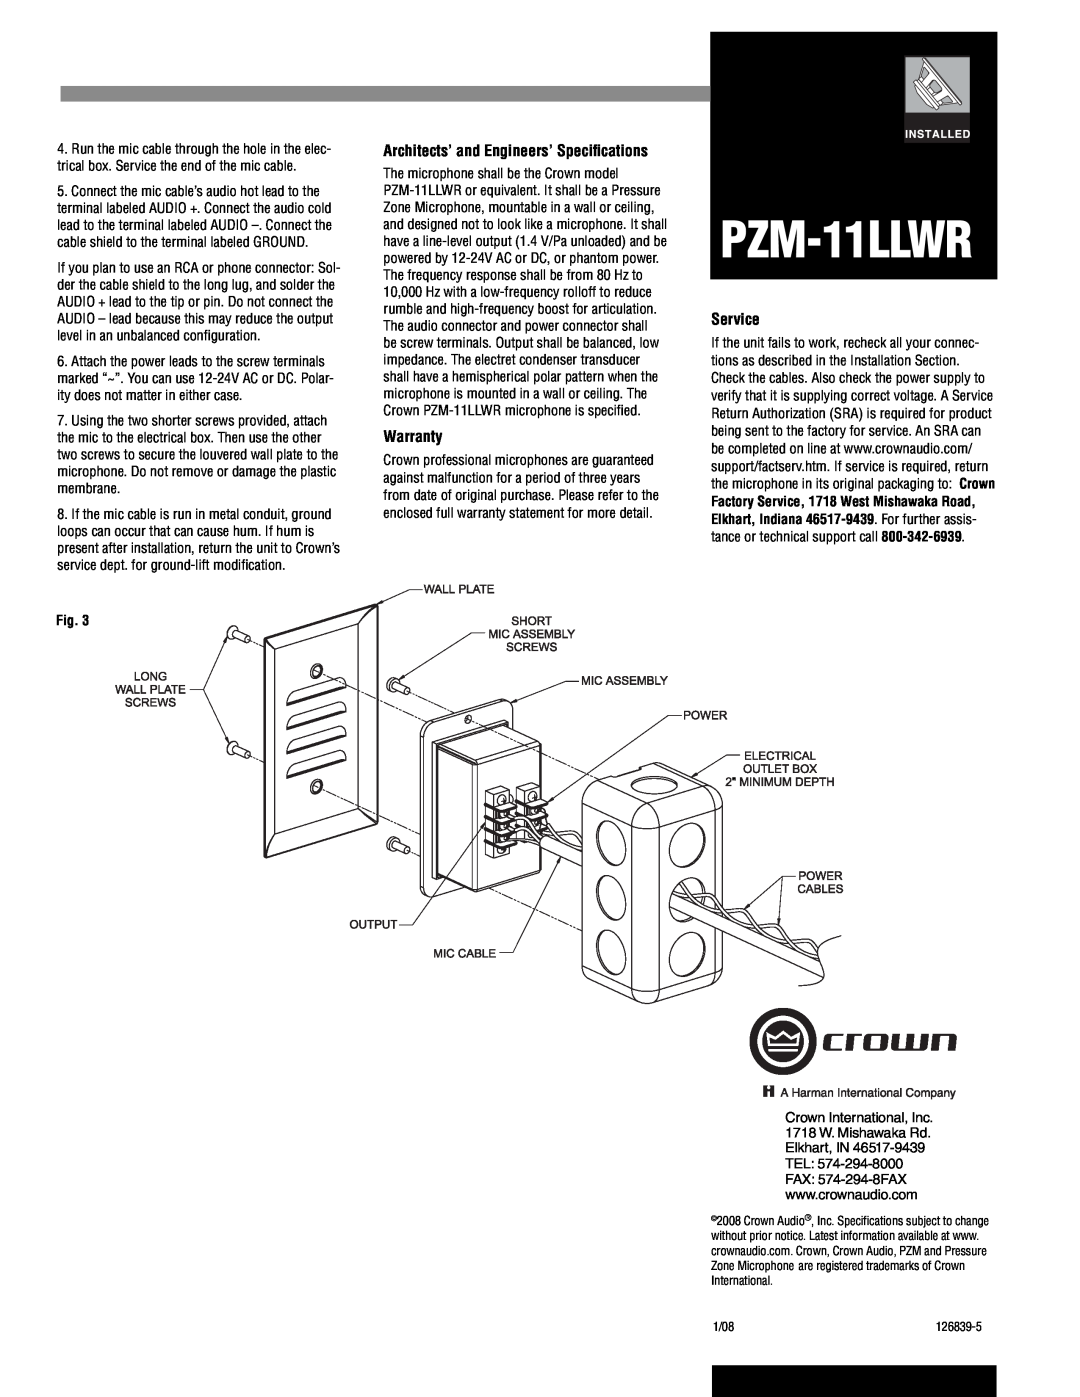 Crown Audio PZM-11LLWR specifications Architects’ and Engineers’ Speciﬁcations, Warranty, Service 